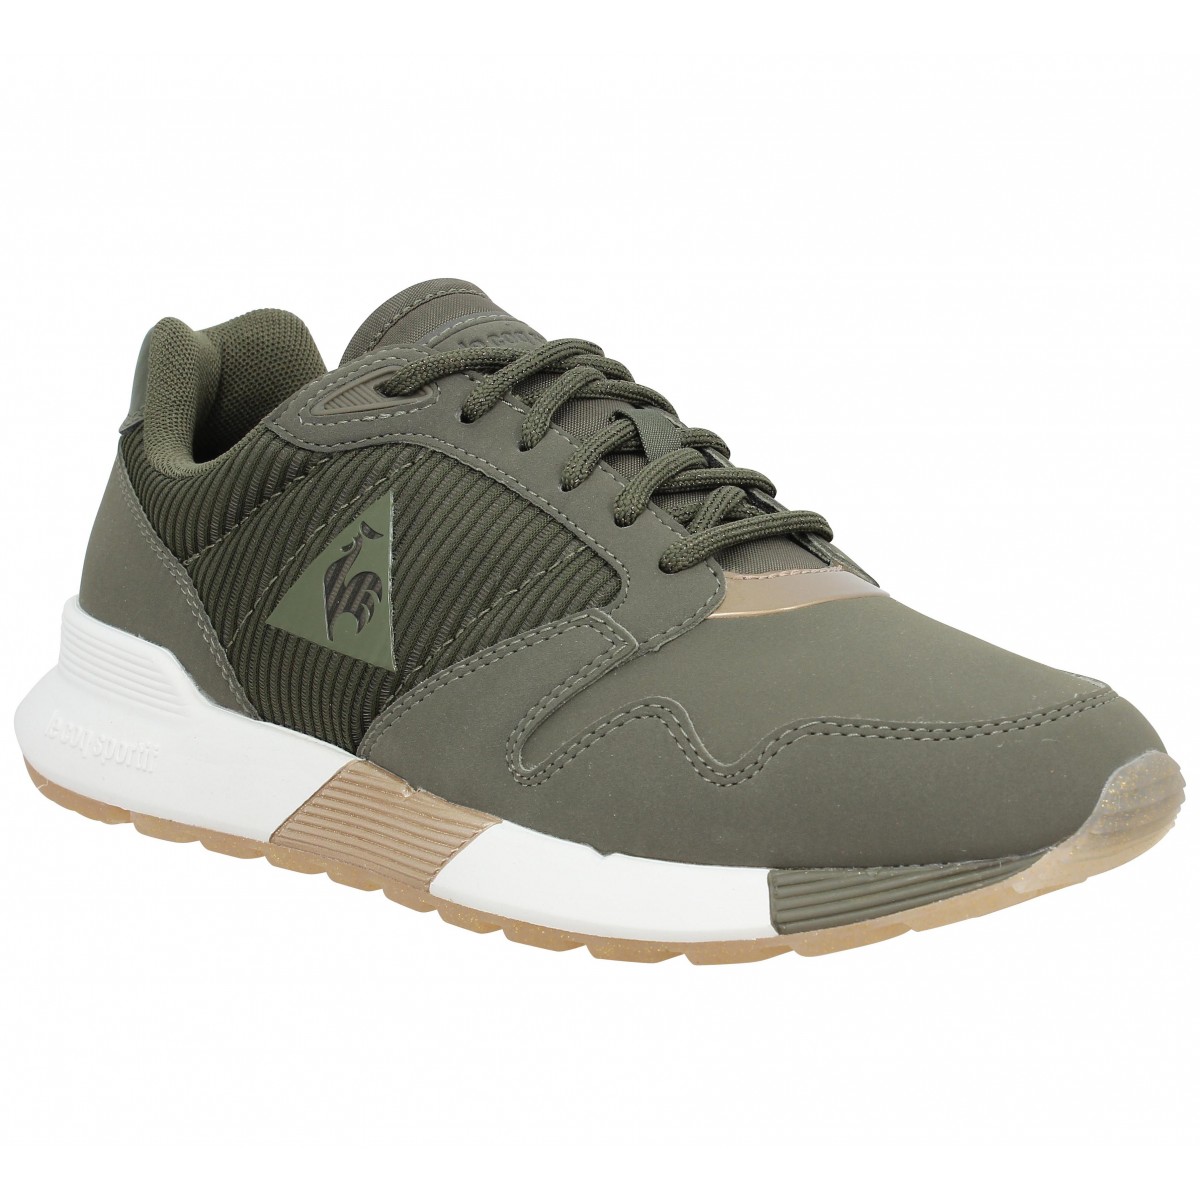 Le coq sportif omega x striped toile femme olive femme | Fanny chaussures